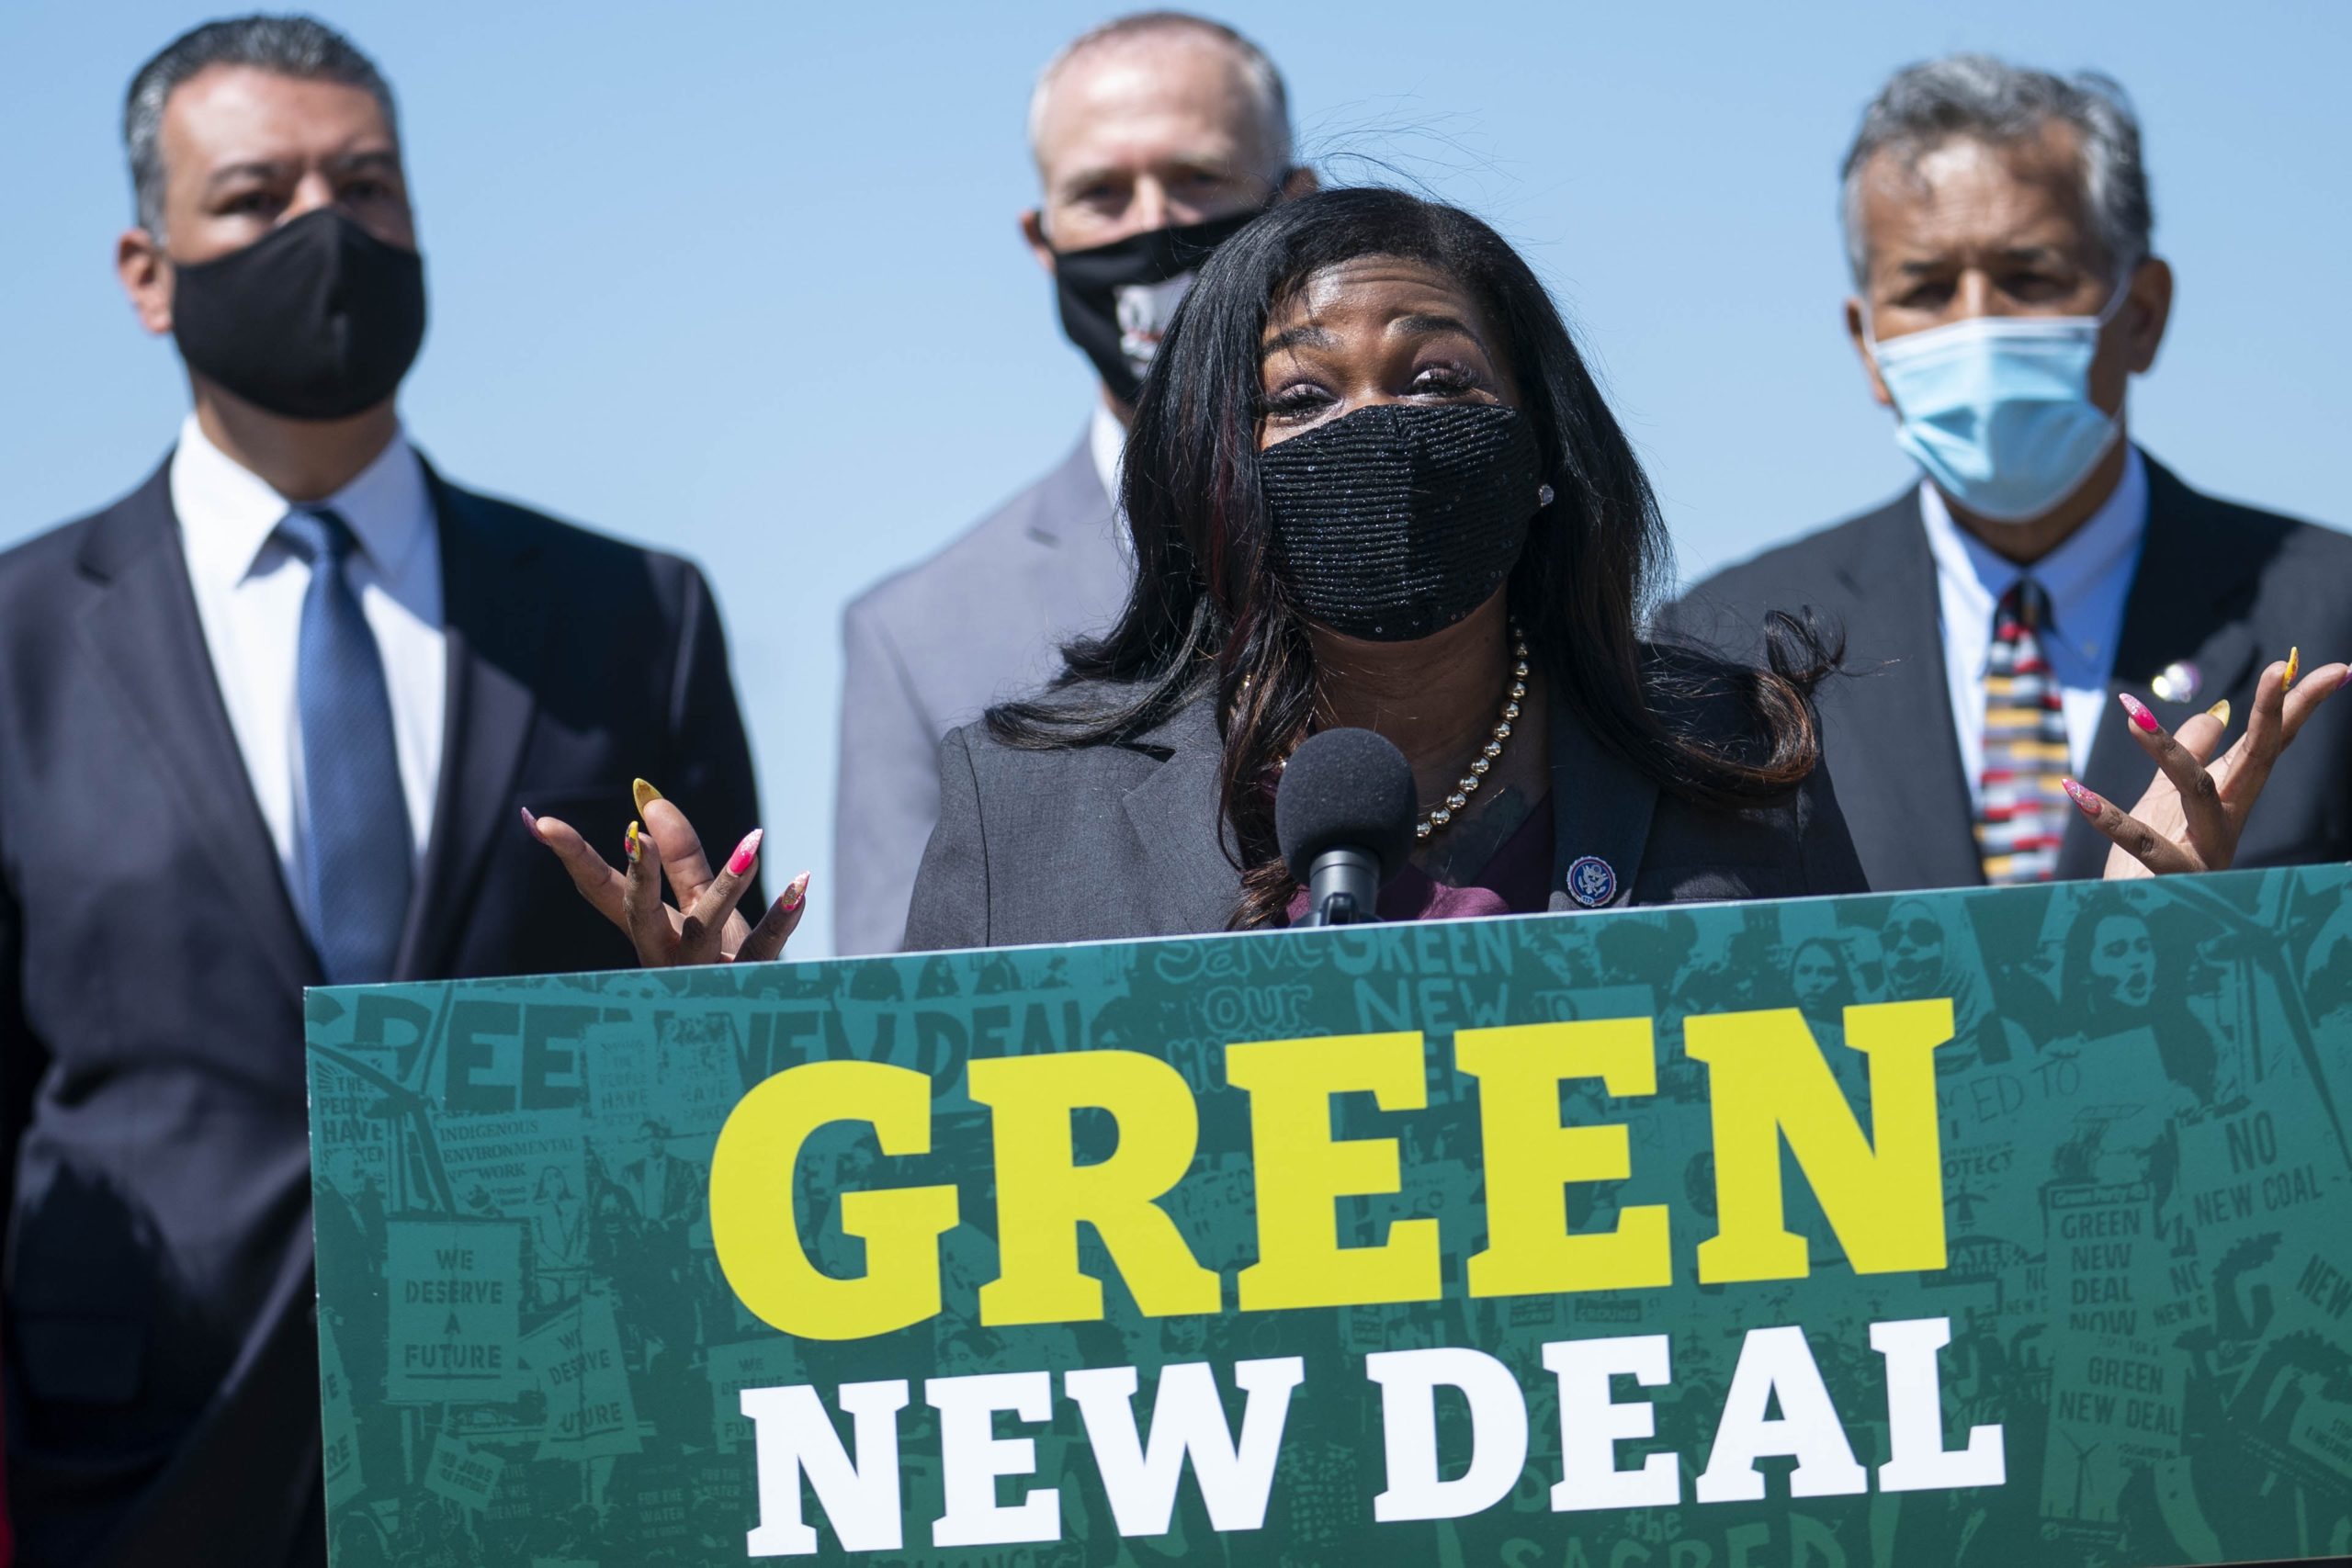 WASHINGTON, DC - APRIL 20: Rep. Cori Bush (D-MO) speaks during a news conference held to re-introduce the Green New Deal at the West Front of the U.S. Capitol on April 20, 2021 in Washington, DC. The news conference was held ahead of Earth Day later this week. (Photo by Sarah Silbiger/Getty Images)